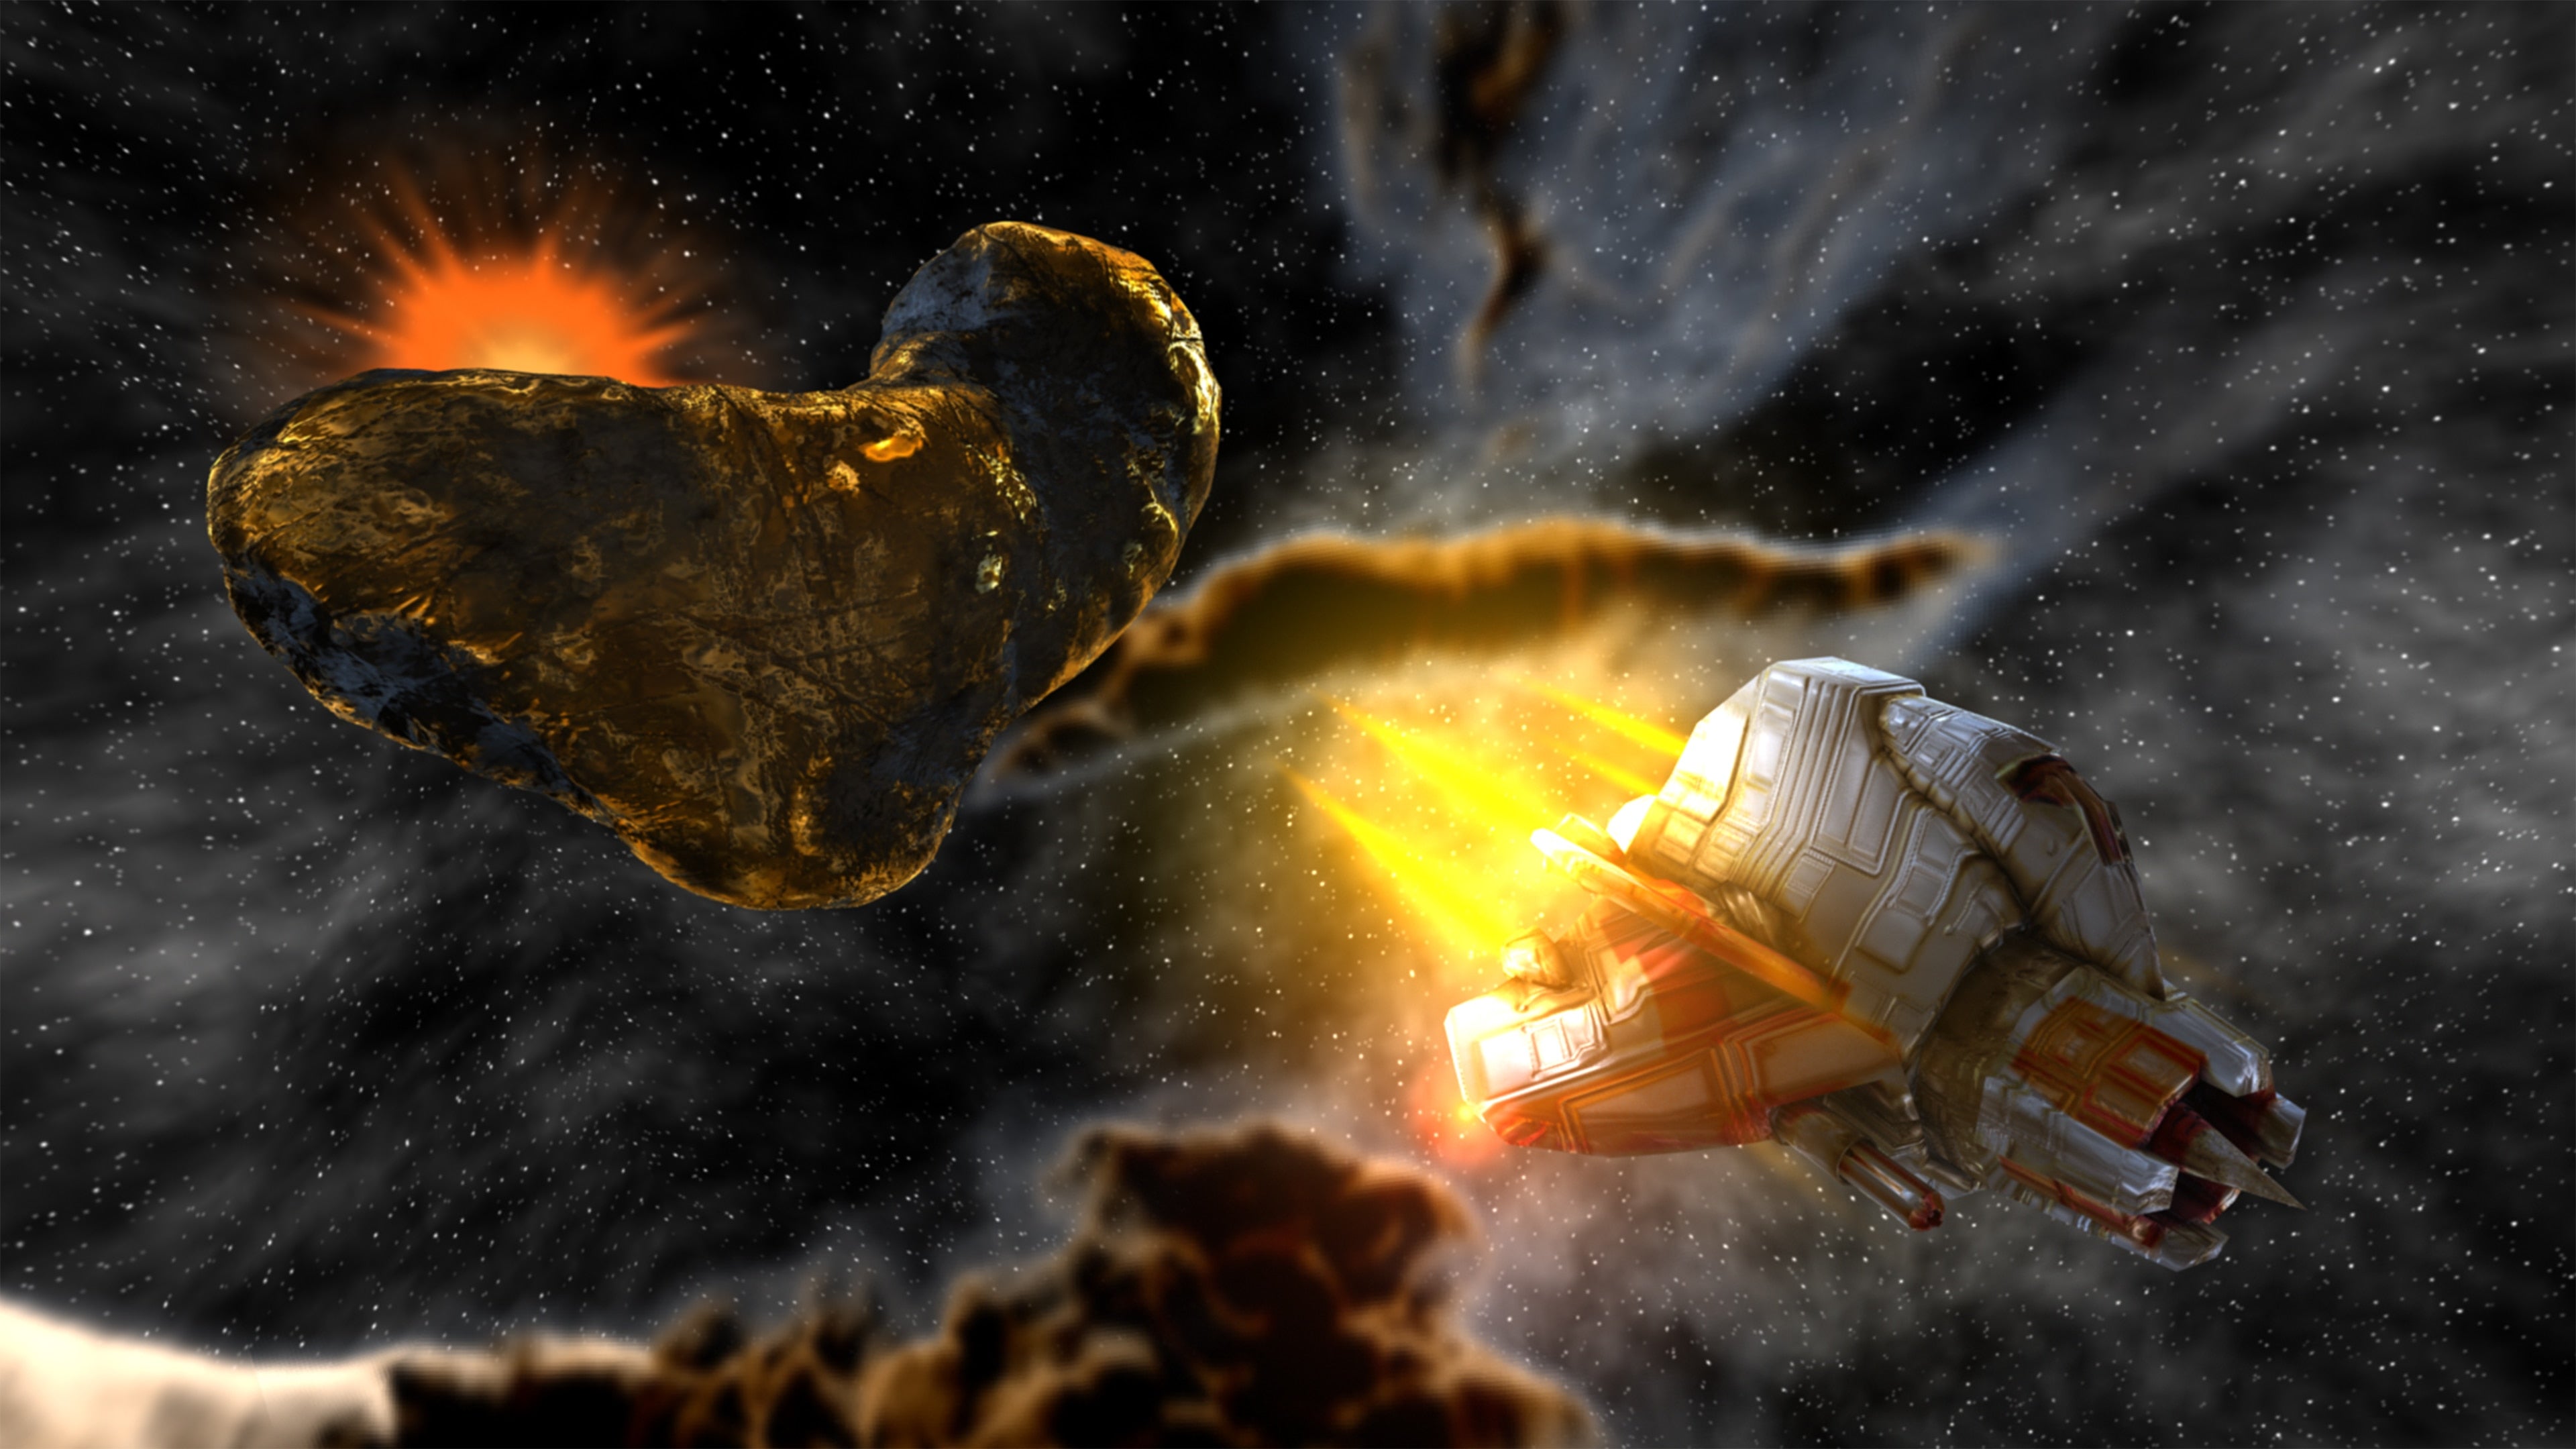 Super Stardust artwork of a ship and asteroid